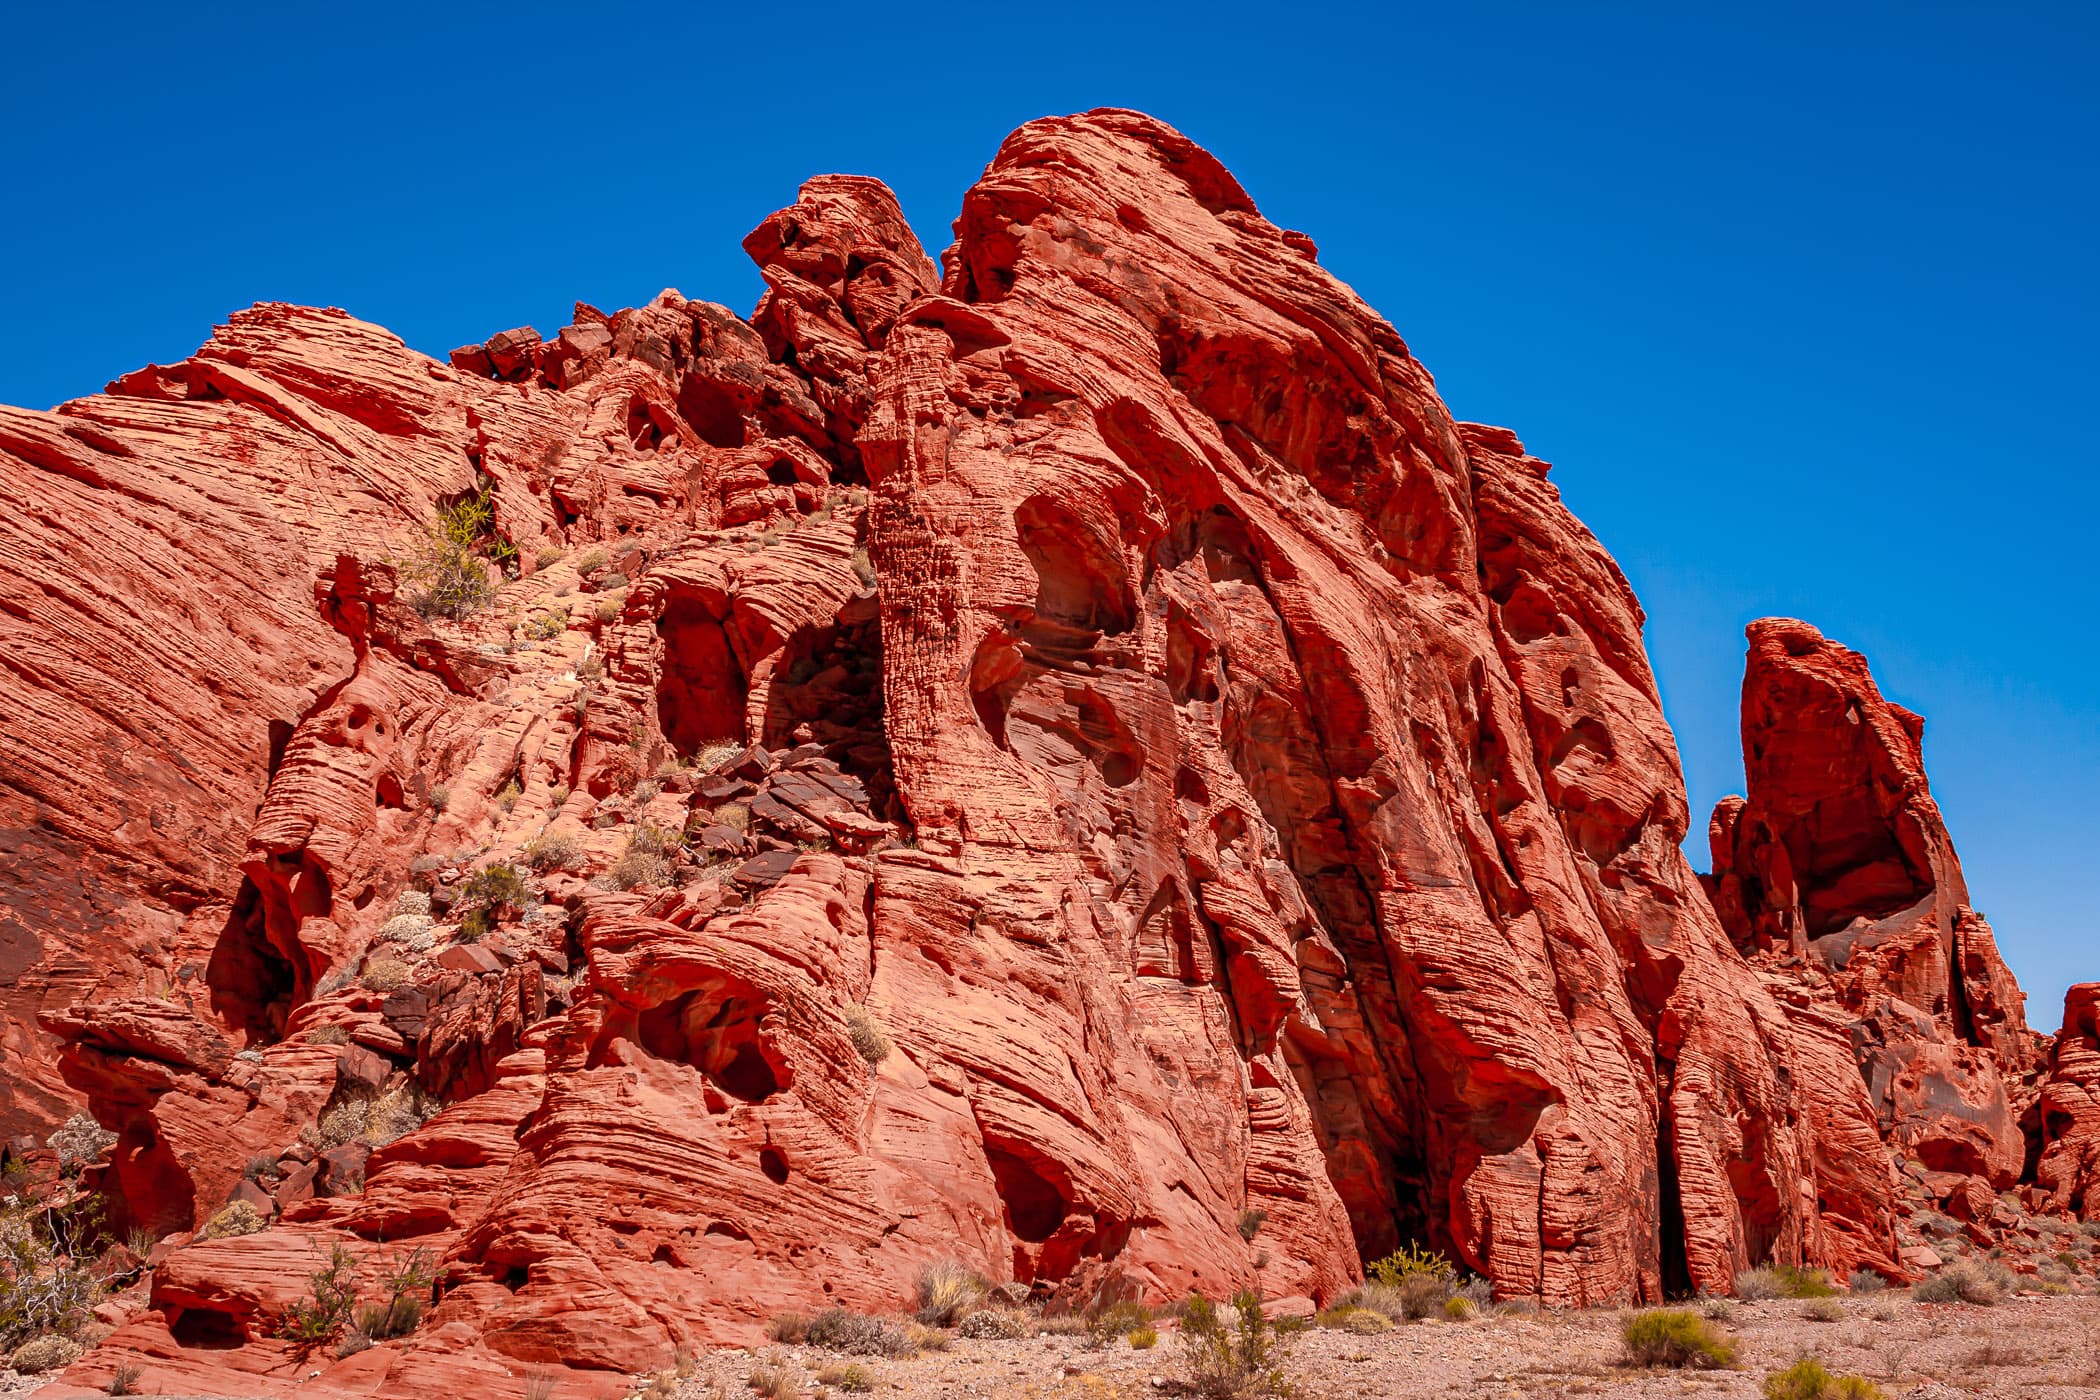 A desert landscape from Valley of Fire, Nevada.